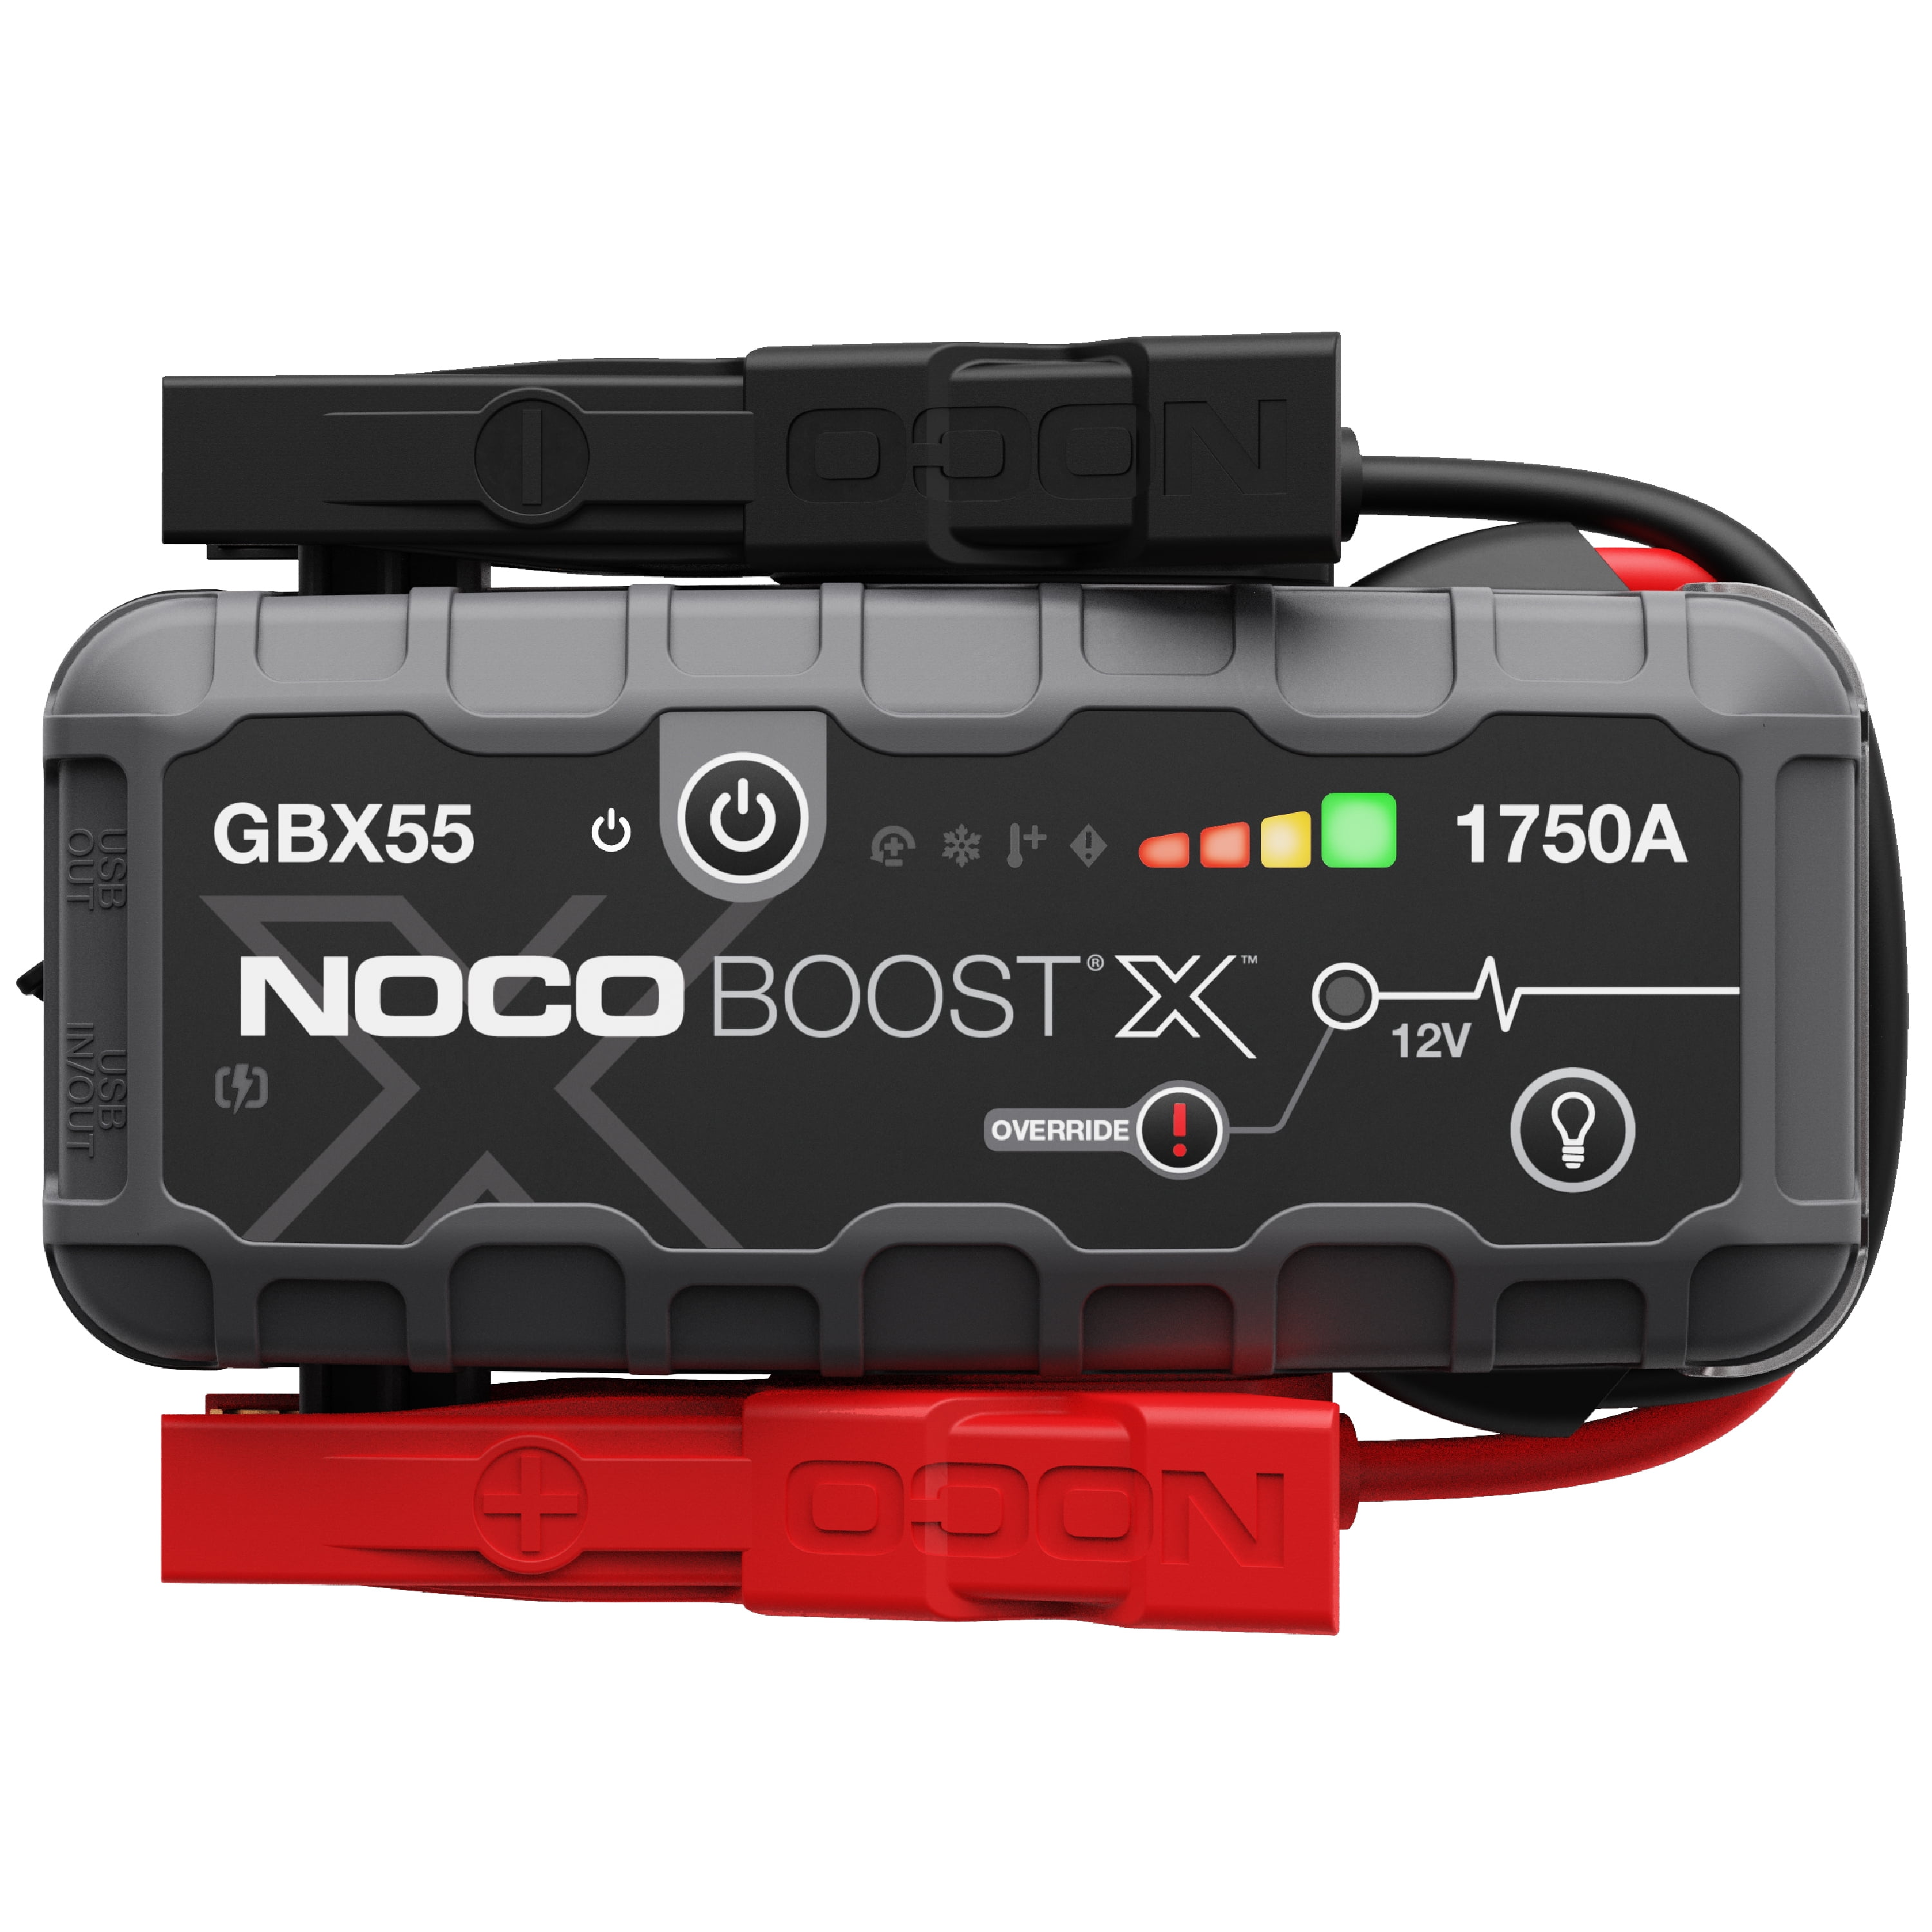 NOCO Boost XL GB50 1500 Amp 12-Volt UltraSafe Lithium Jump Starter Box, Car  Battery Booster Pack, Portable Power Bank Charger, and Jumper Cables for up  to 7-Liter Gasoline and 4-Liter Diesel Engines : Automotive 